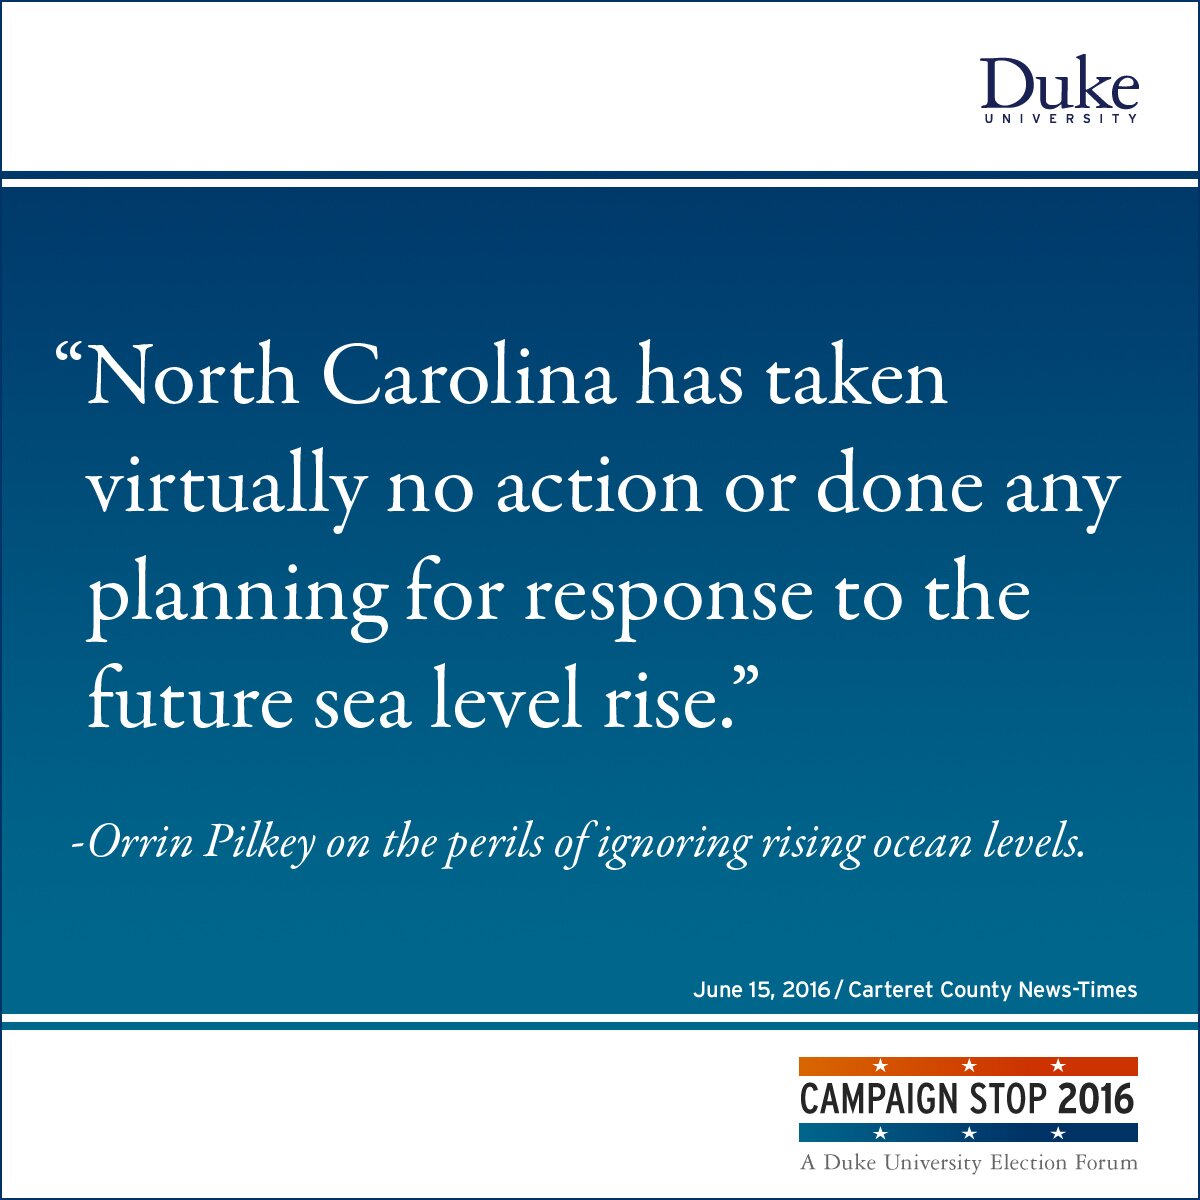 “North Carolina has taken virtually no action or done any planning for response to the future sea level rise.” -Orrin Pilkey on the perils of ignoring rising ocean levels.